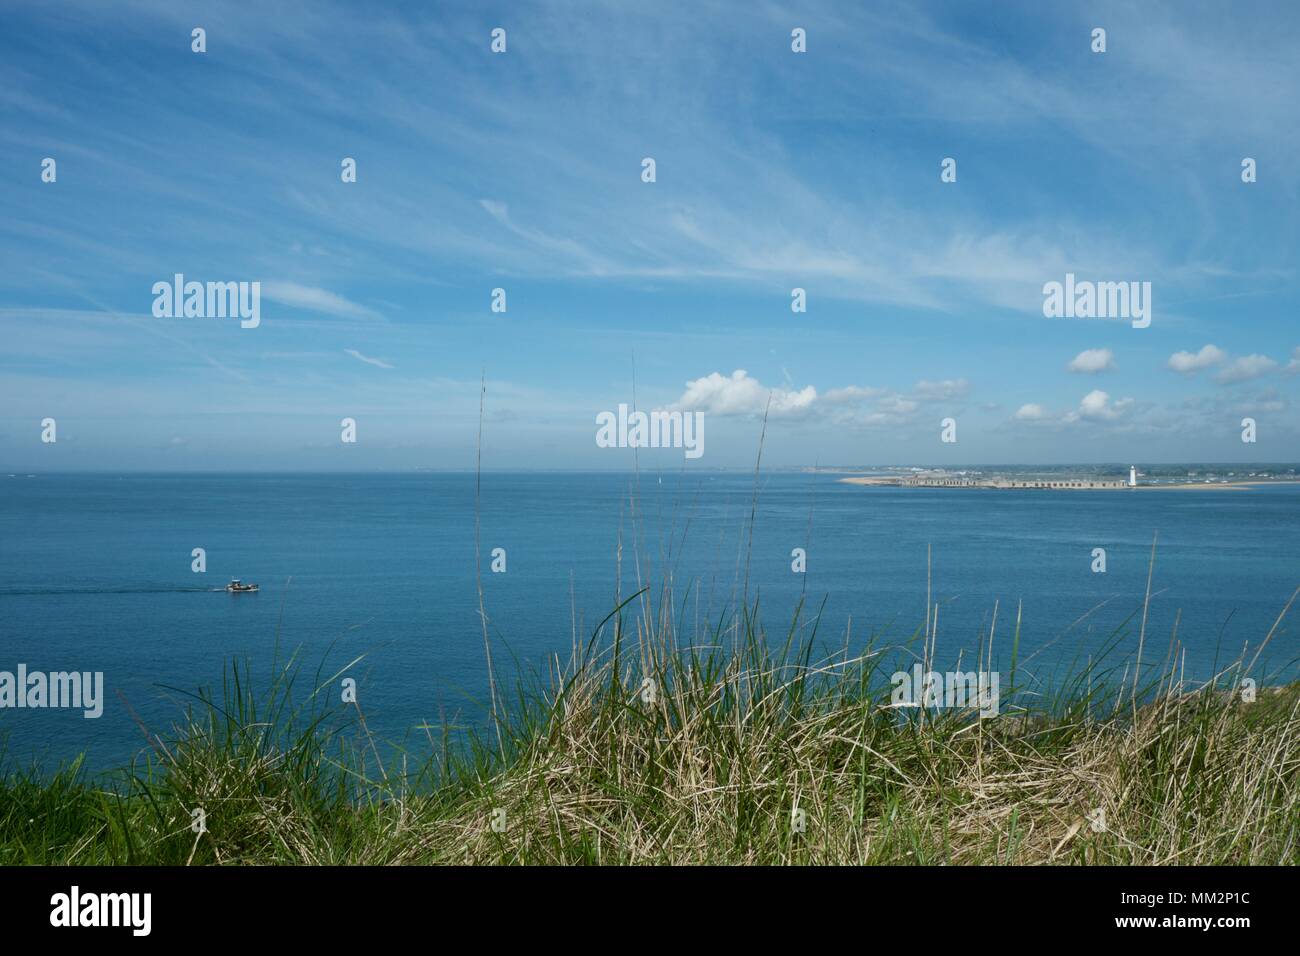 looking across the Solent towards Hurst Castle from Colwell Bay, Isle of Wight, UK on a sunny day with light cloud Stock Photo